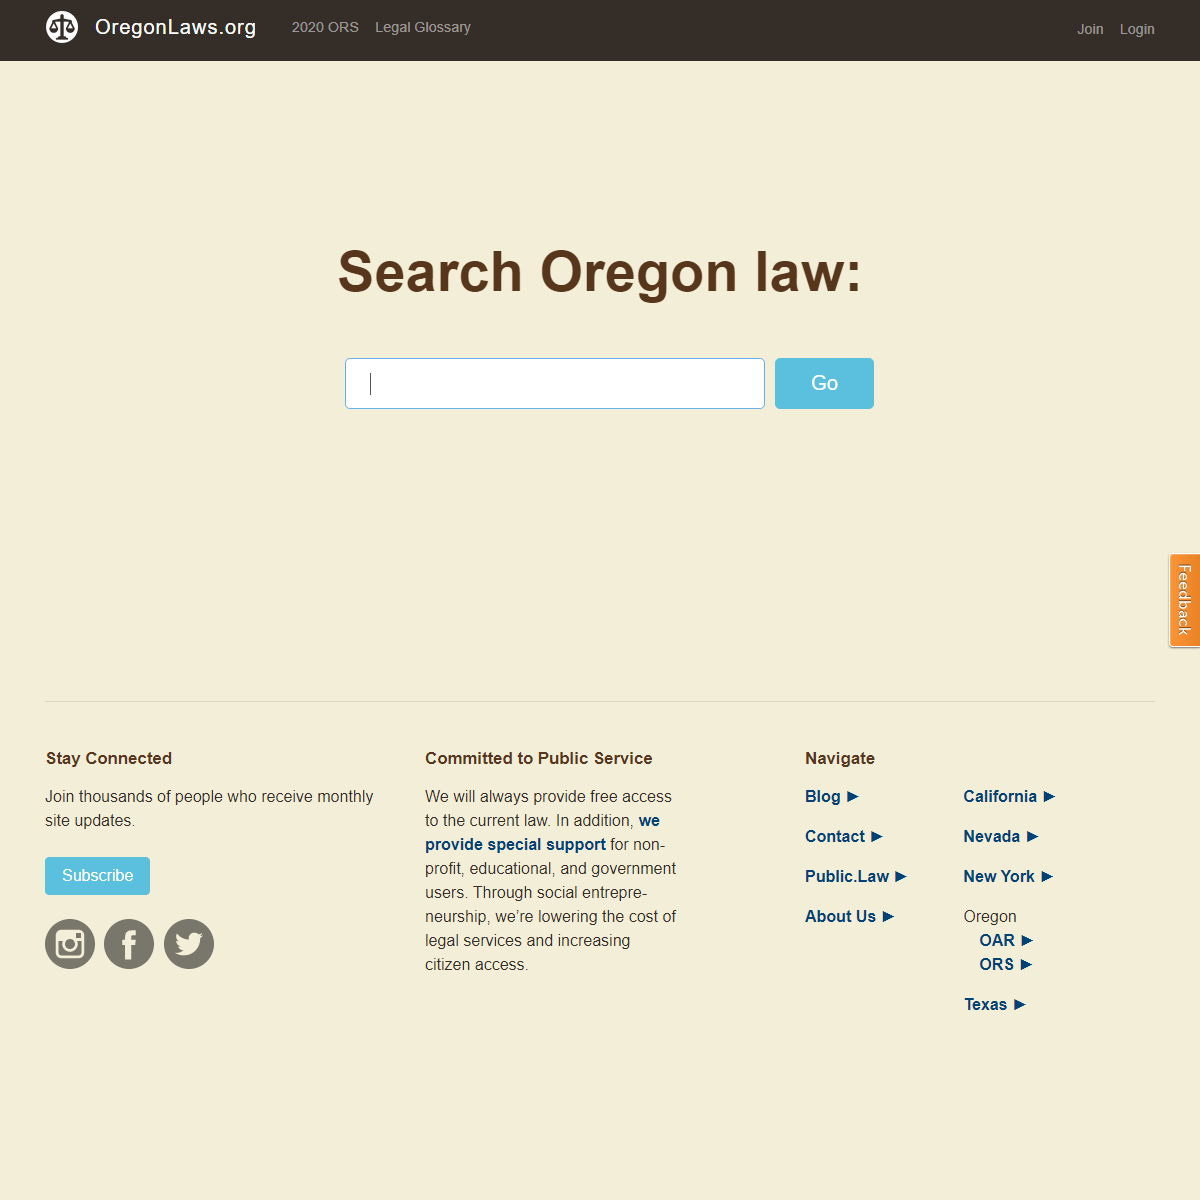 A complete backup of https://www.oregonlaws.org/